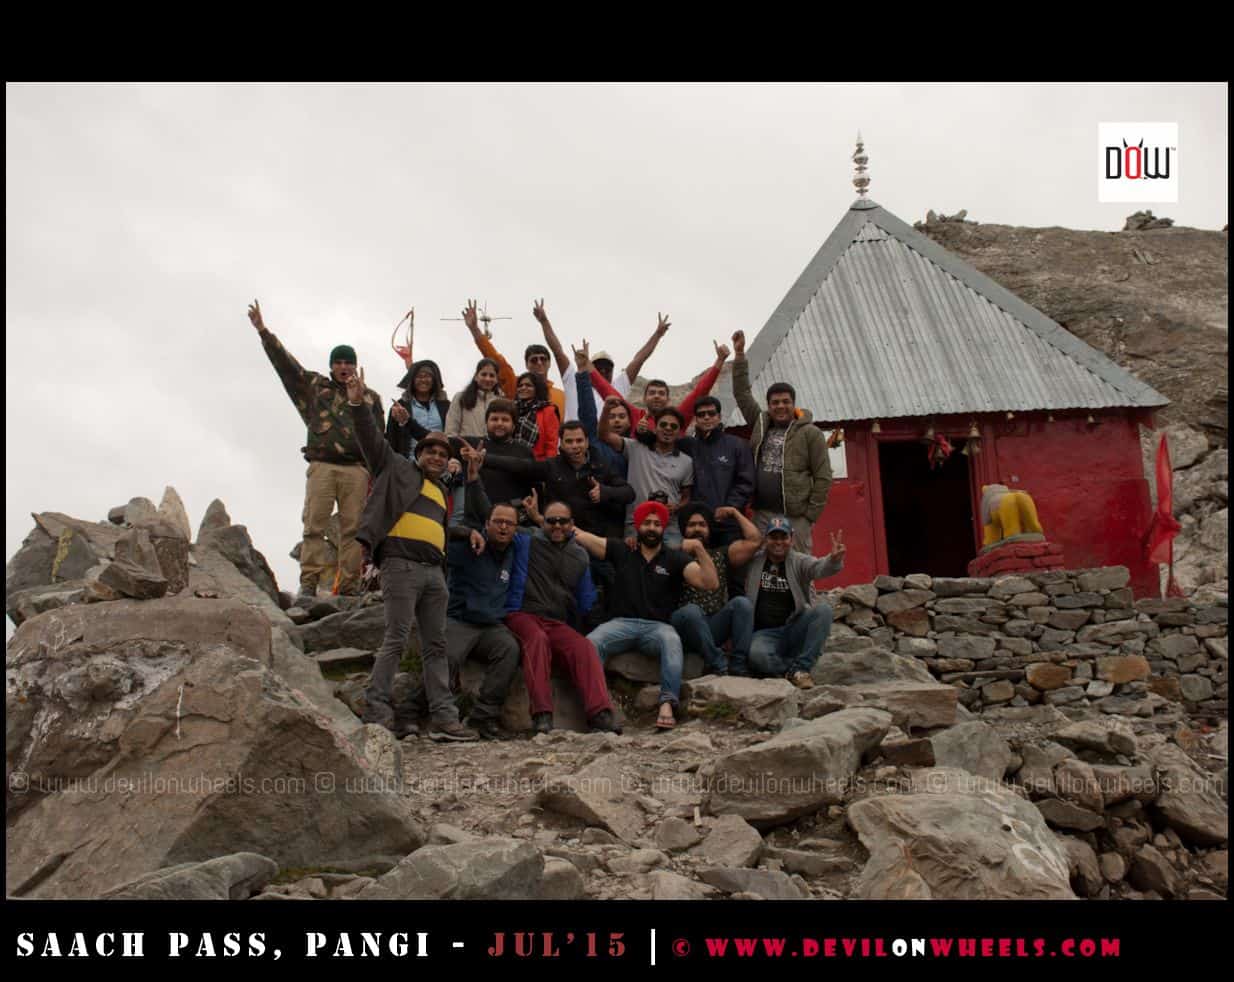 The Devils Gang at Sach Pass, Three cheers for the Spirits shown